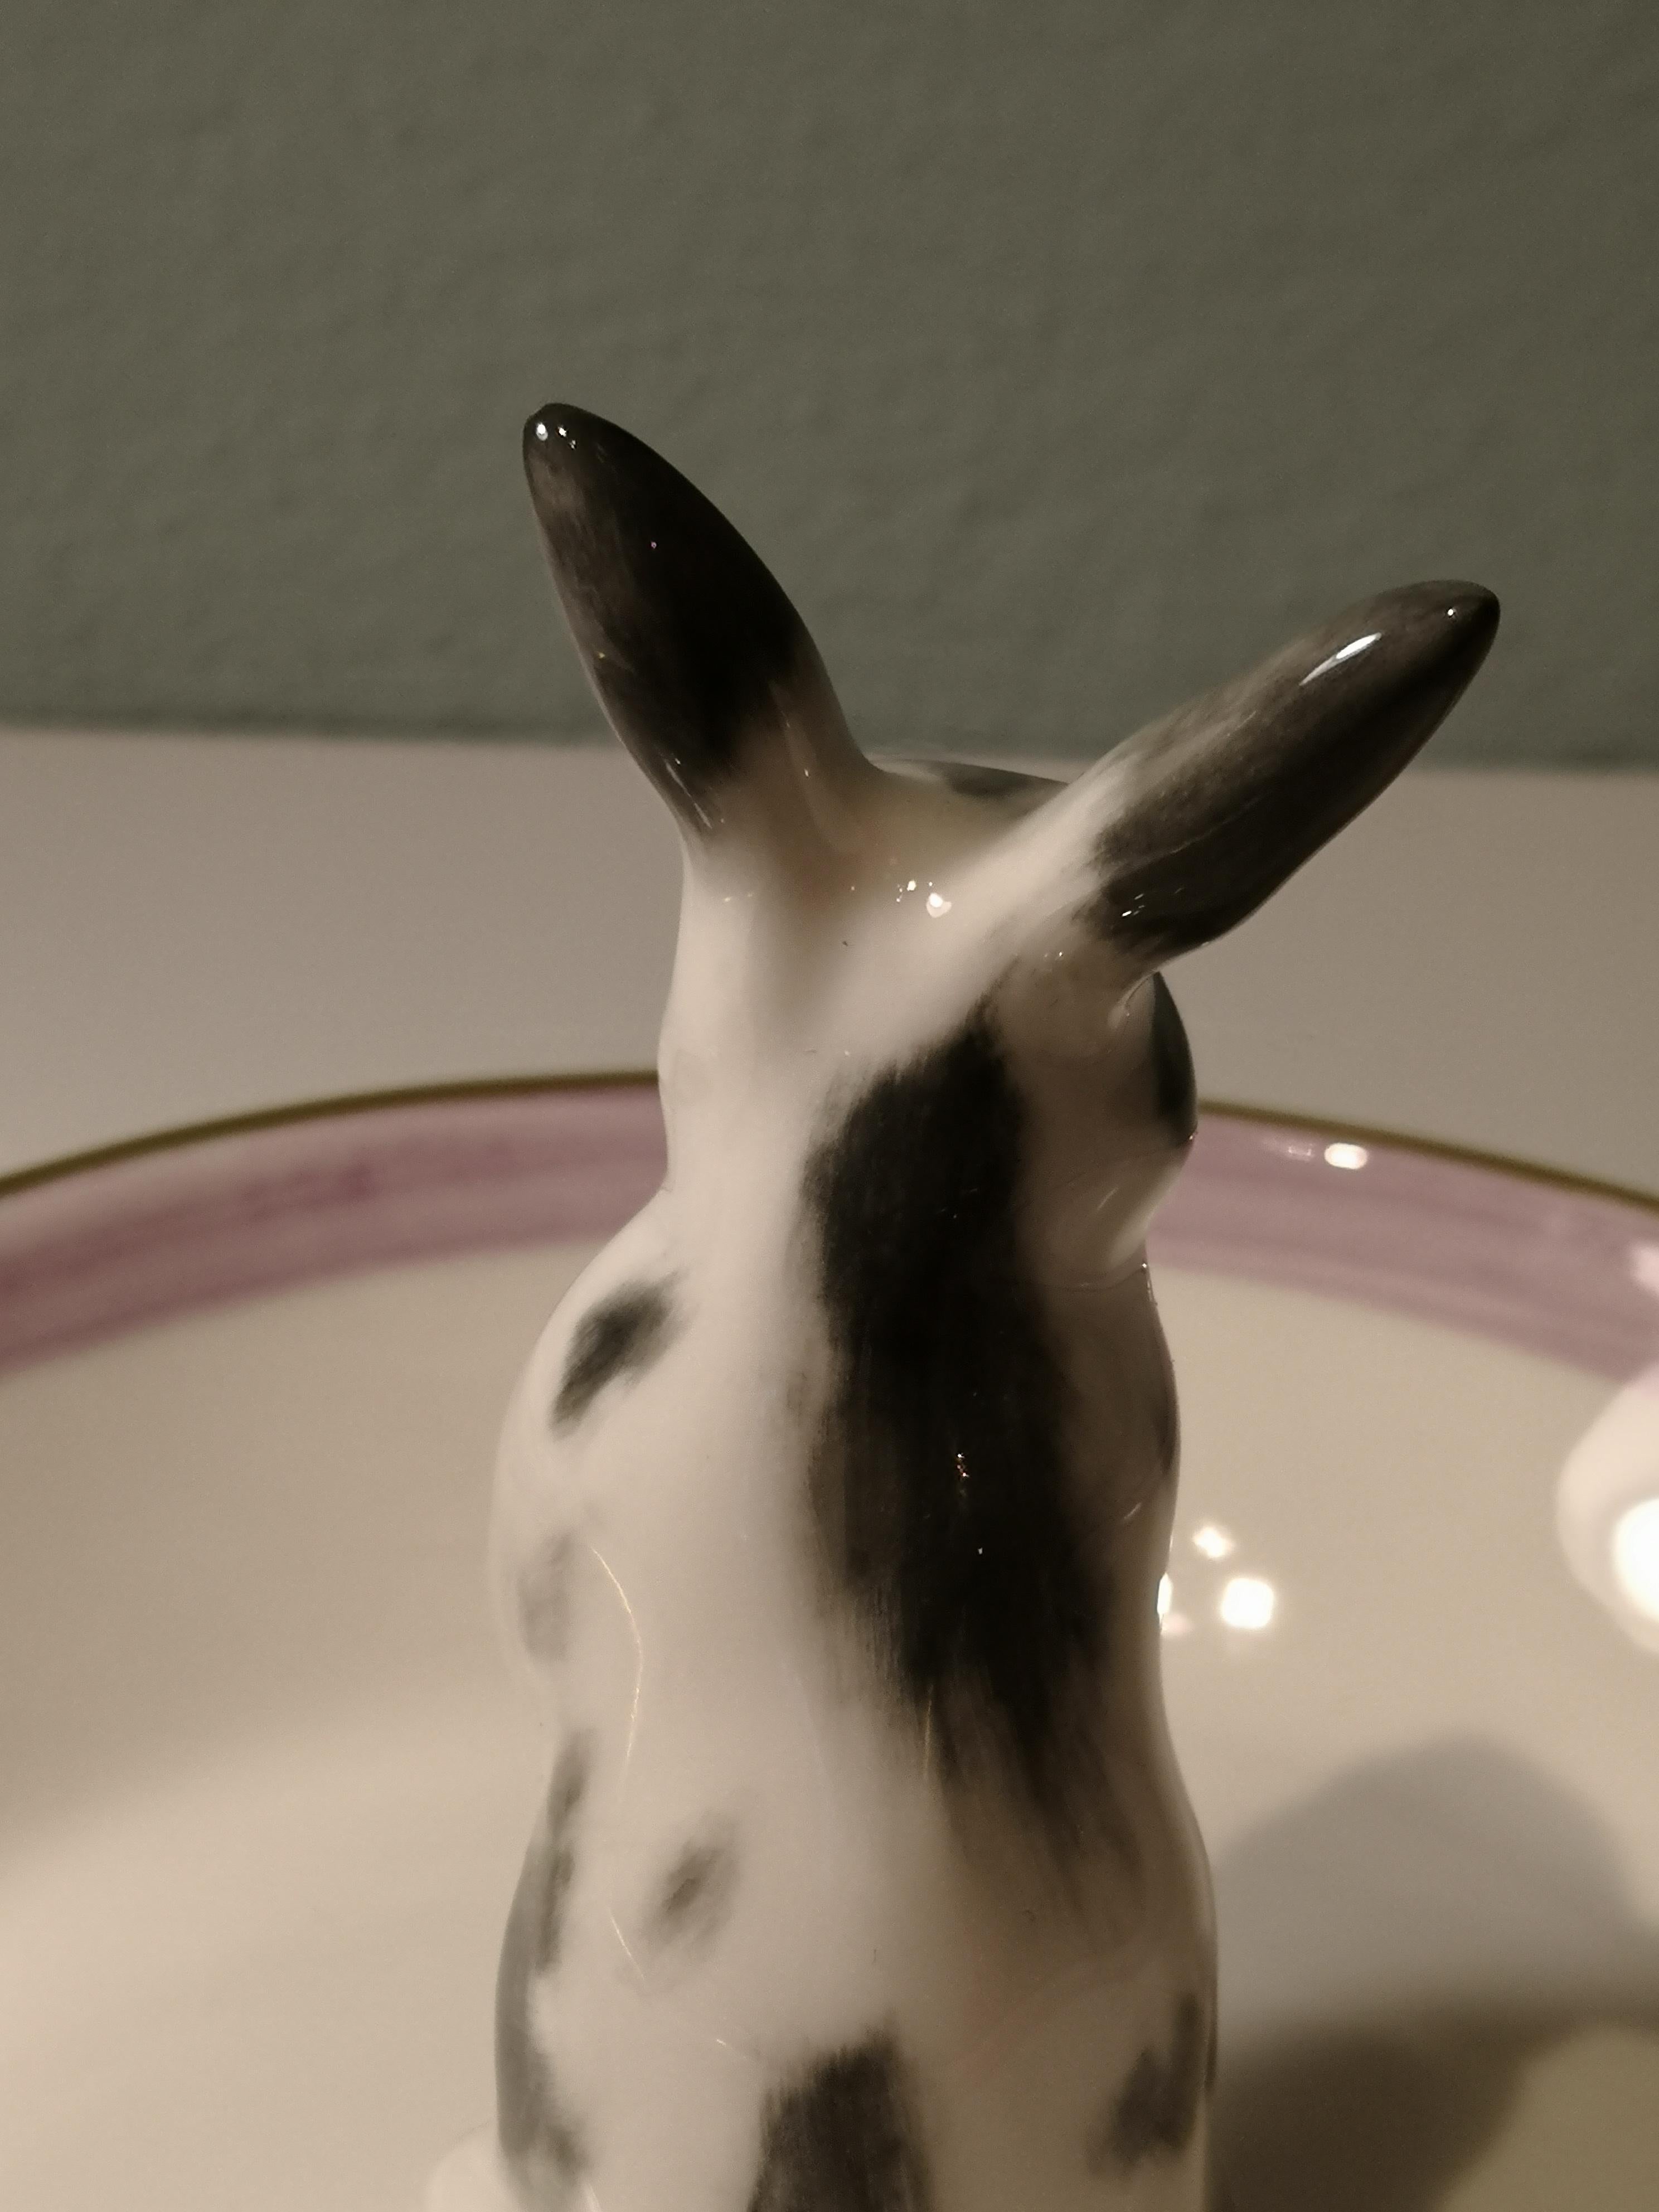 Completely handmade porcelain bowl with a hands-free naturalistic painted Easter bunny figure with grey spots in country style. The bunny is sitting in the middle of the bowl for decorating nuts or sweets around. Rimmed with a pink and 24-carat gold